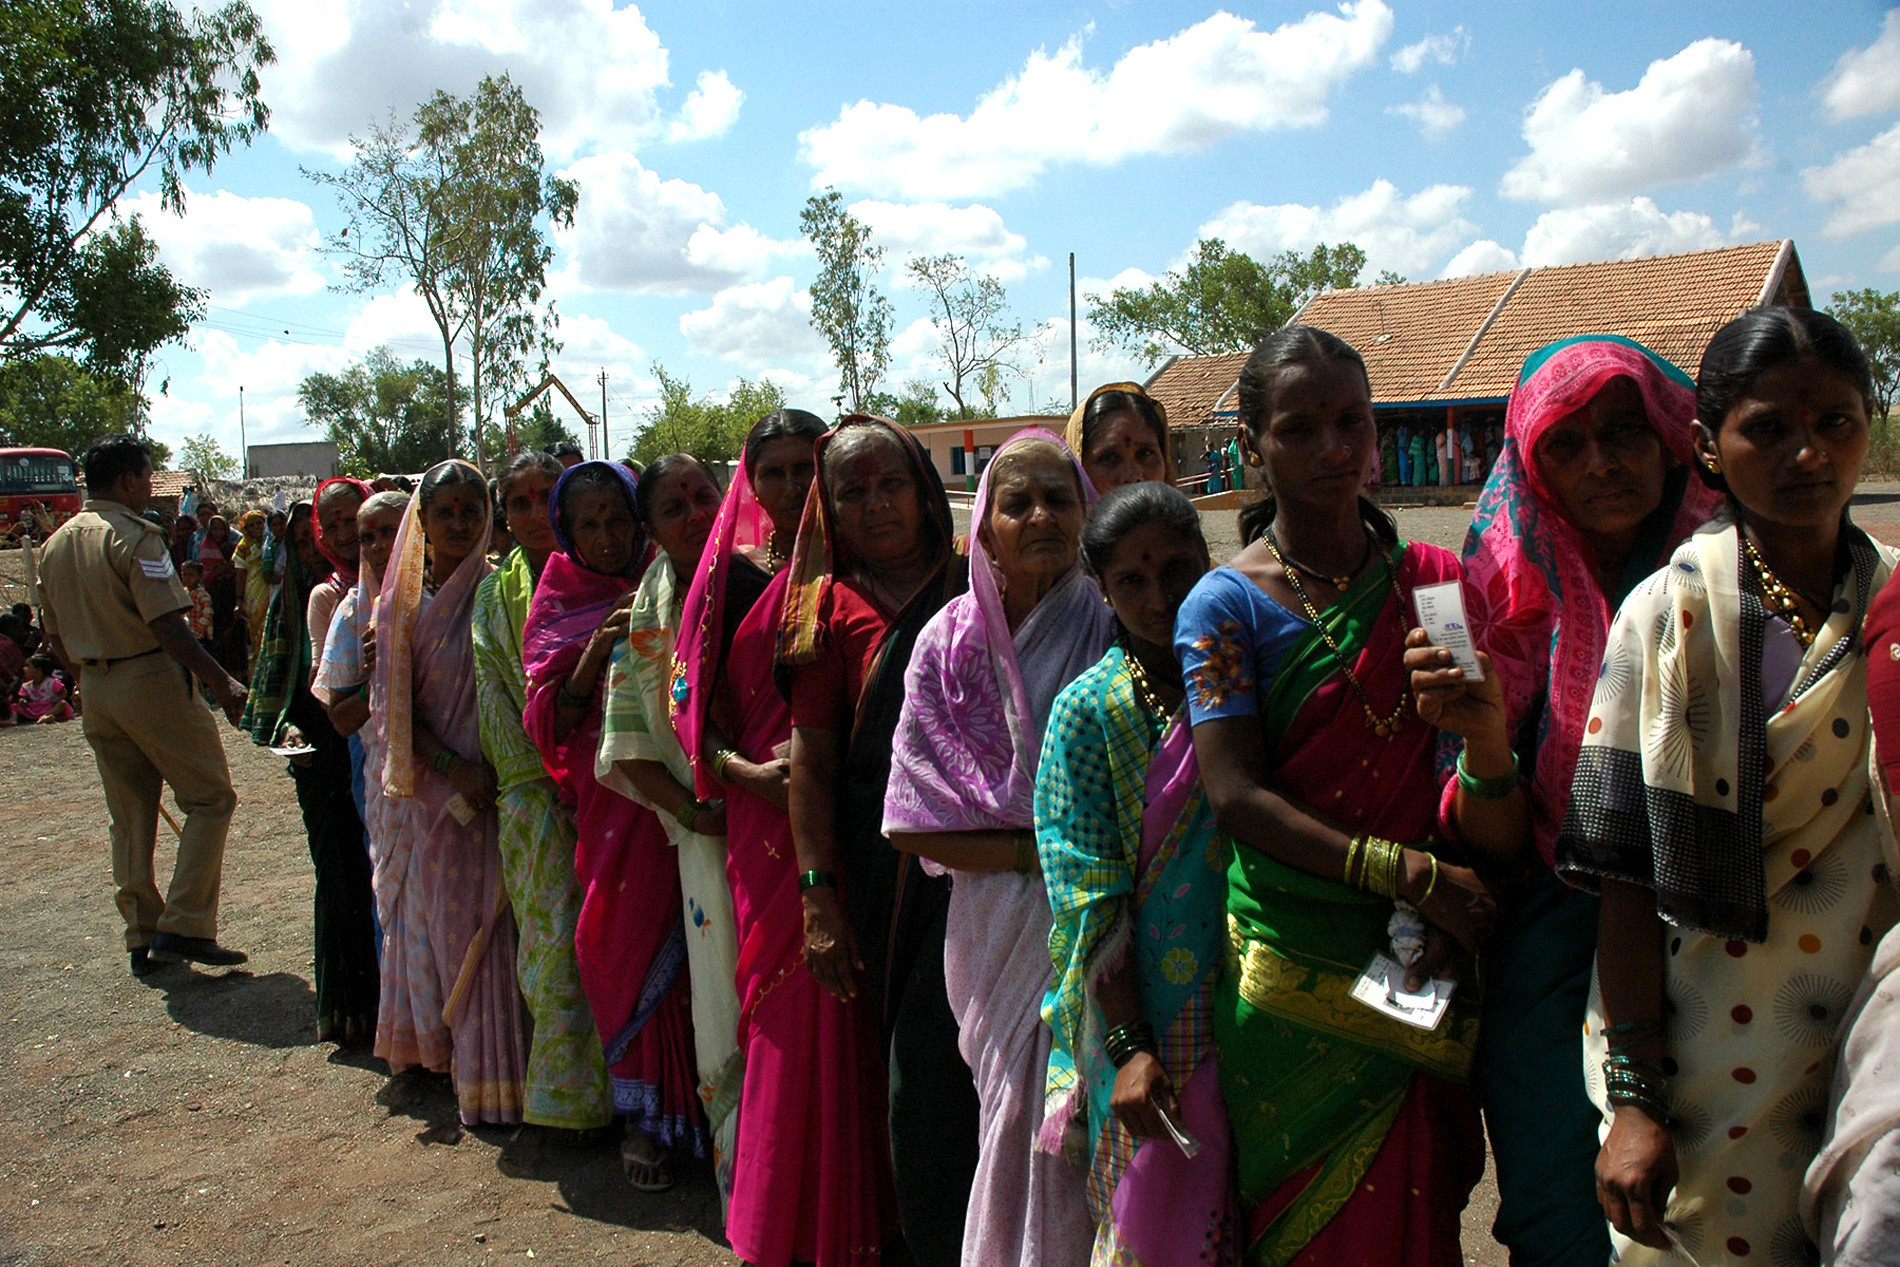 A long queue of women voters waiting to cast their vote at a polling booth of the village Sambhrgi, district Belgam at Karnataka during the Elections of the Legislative Assembly of Karnataka-2008 on May 22, 2008.